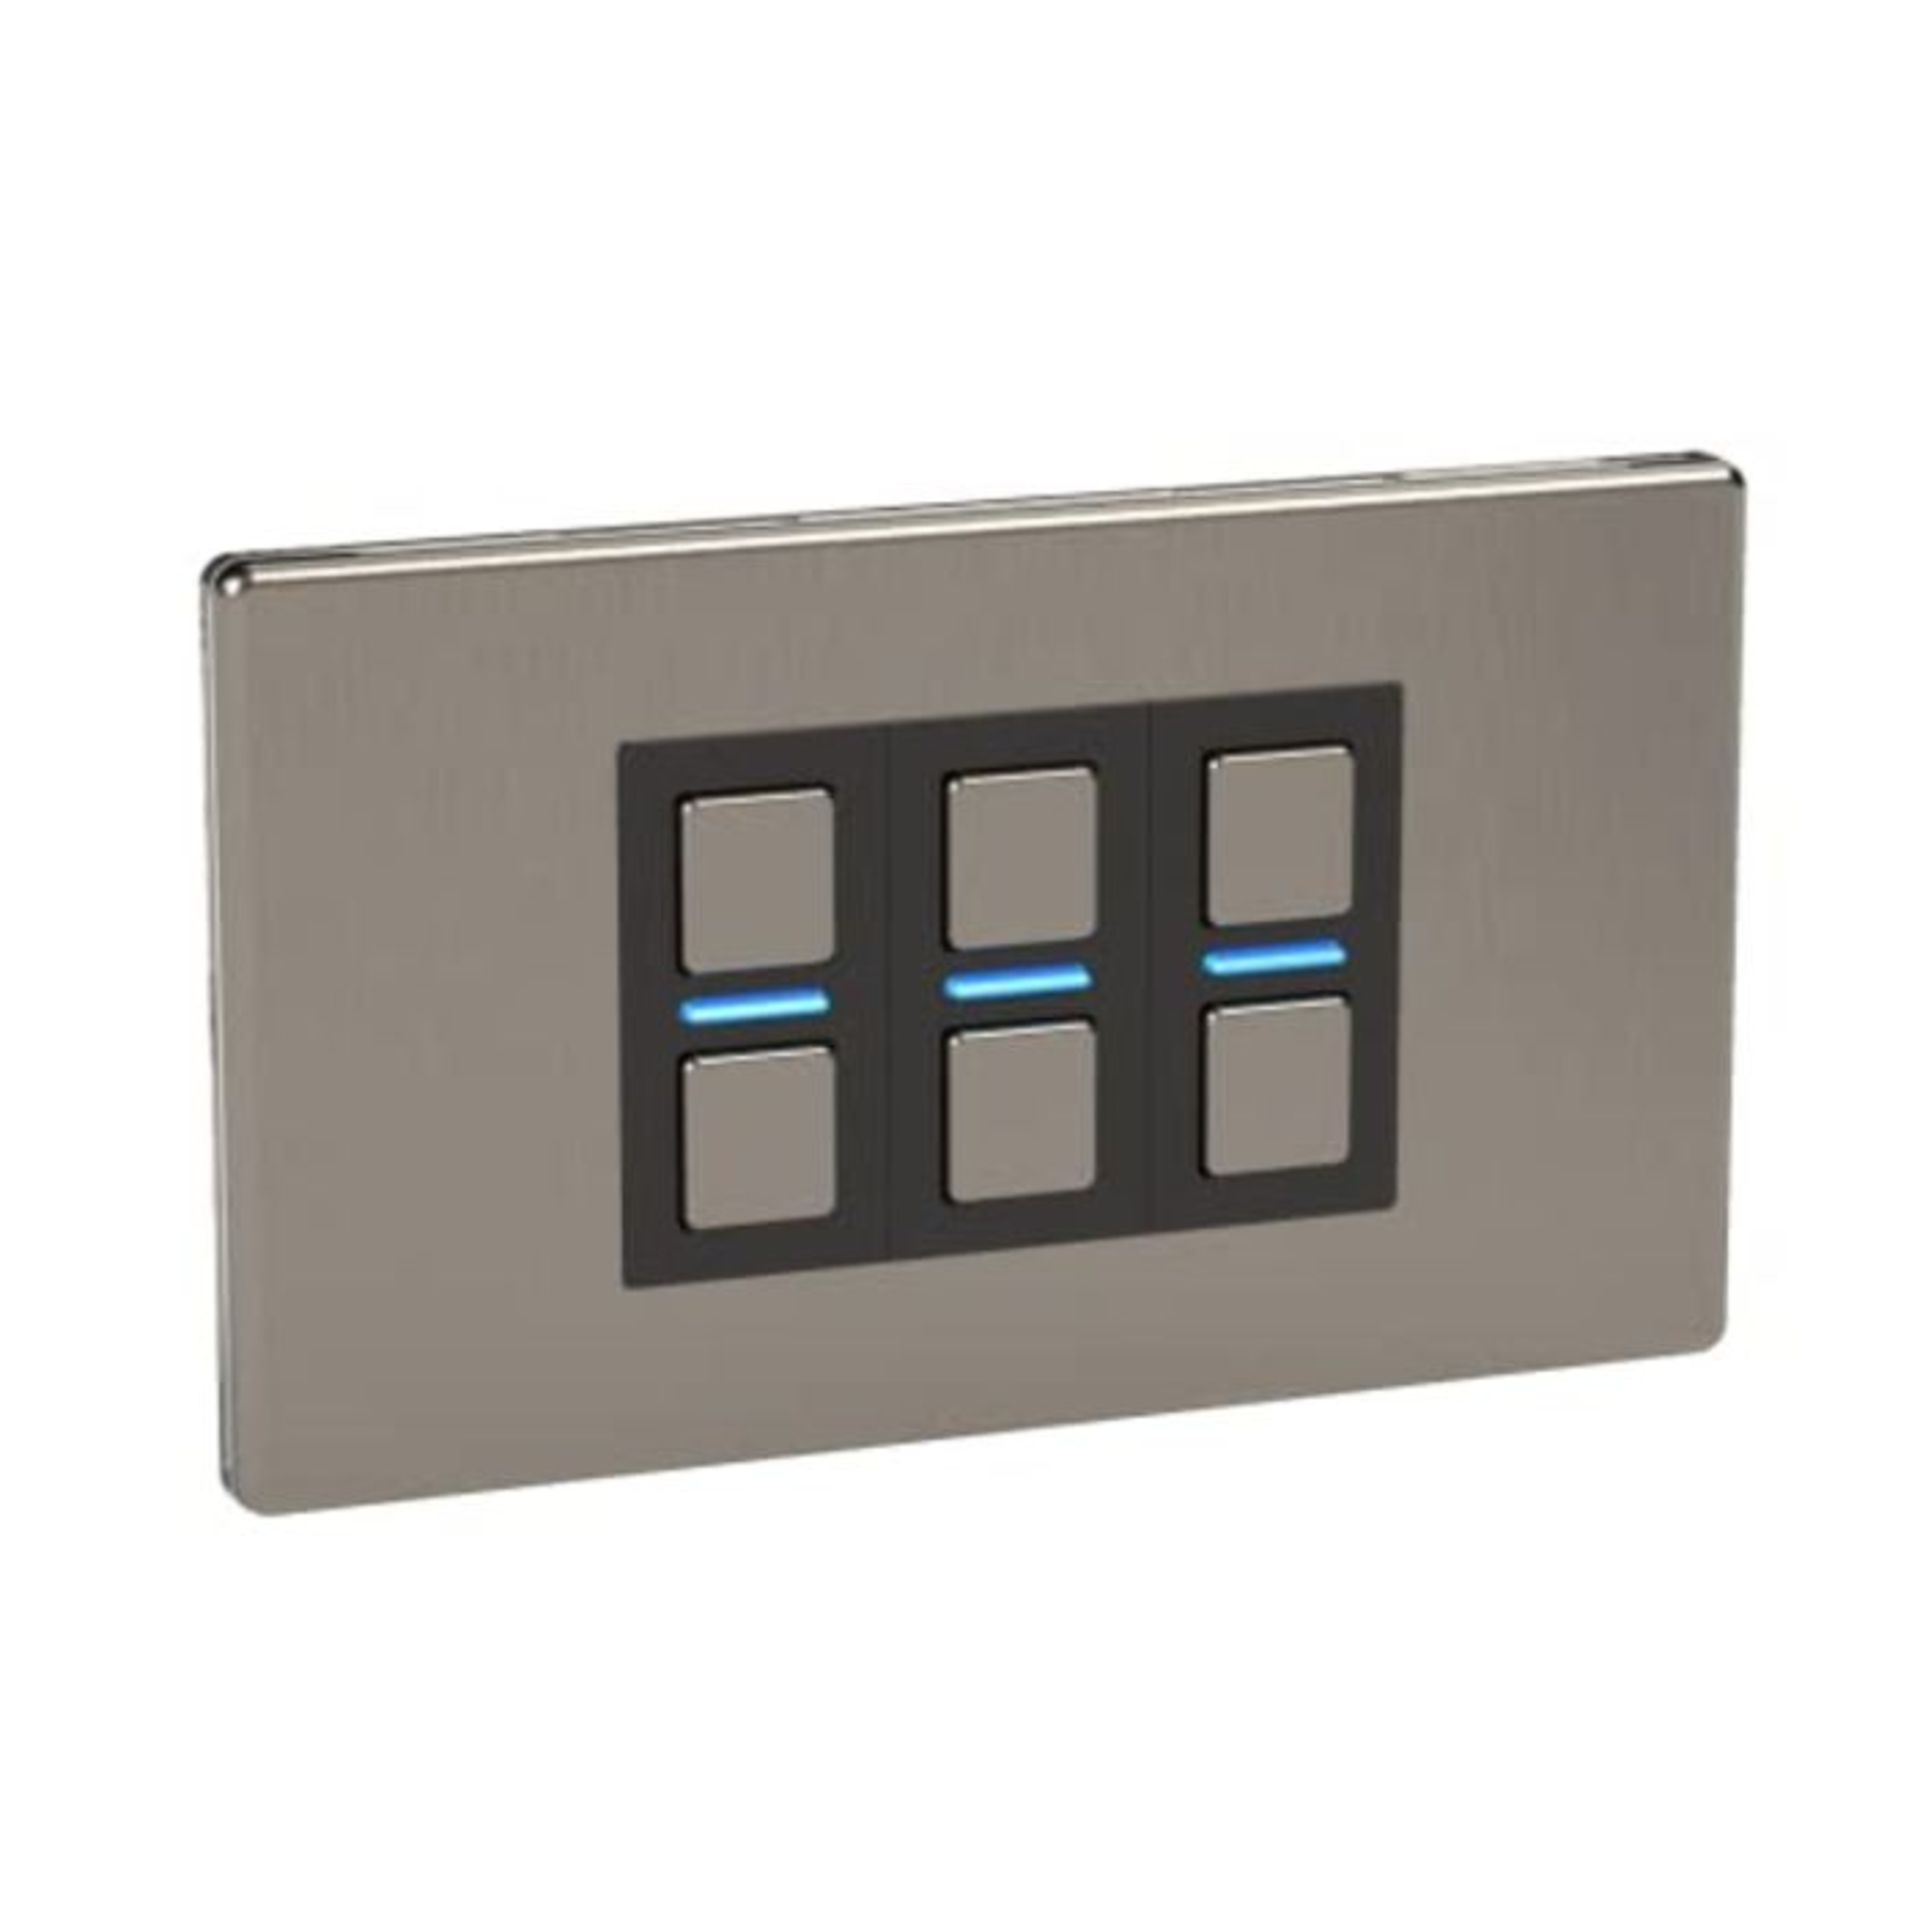 RRP £159.00 Lightwave LP23MK2 Smart Dimmer with Energy Monitoring, 3 Gang, Stainless Steel - Works